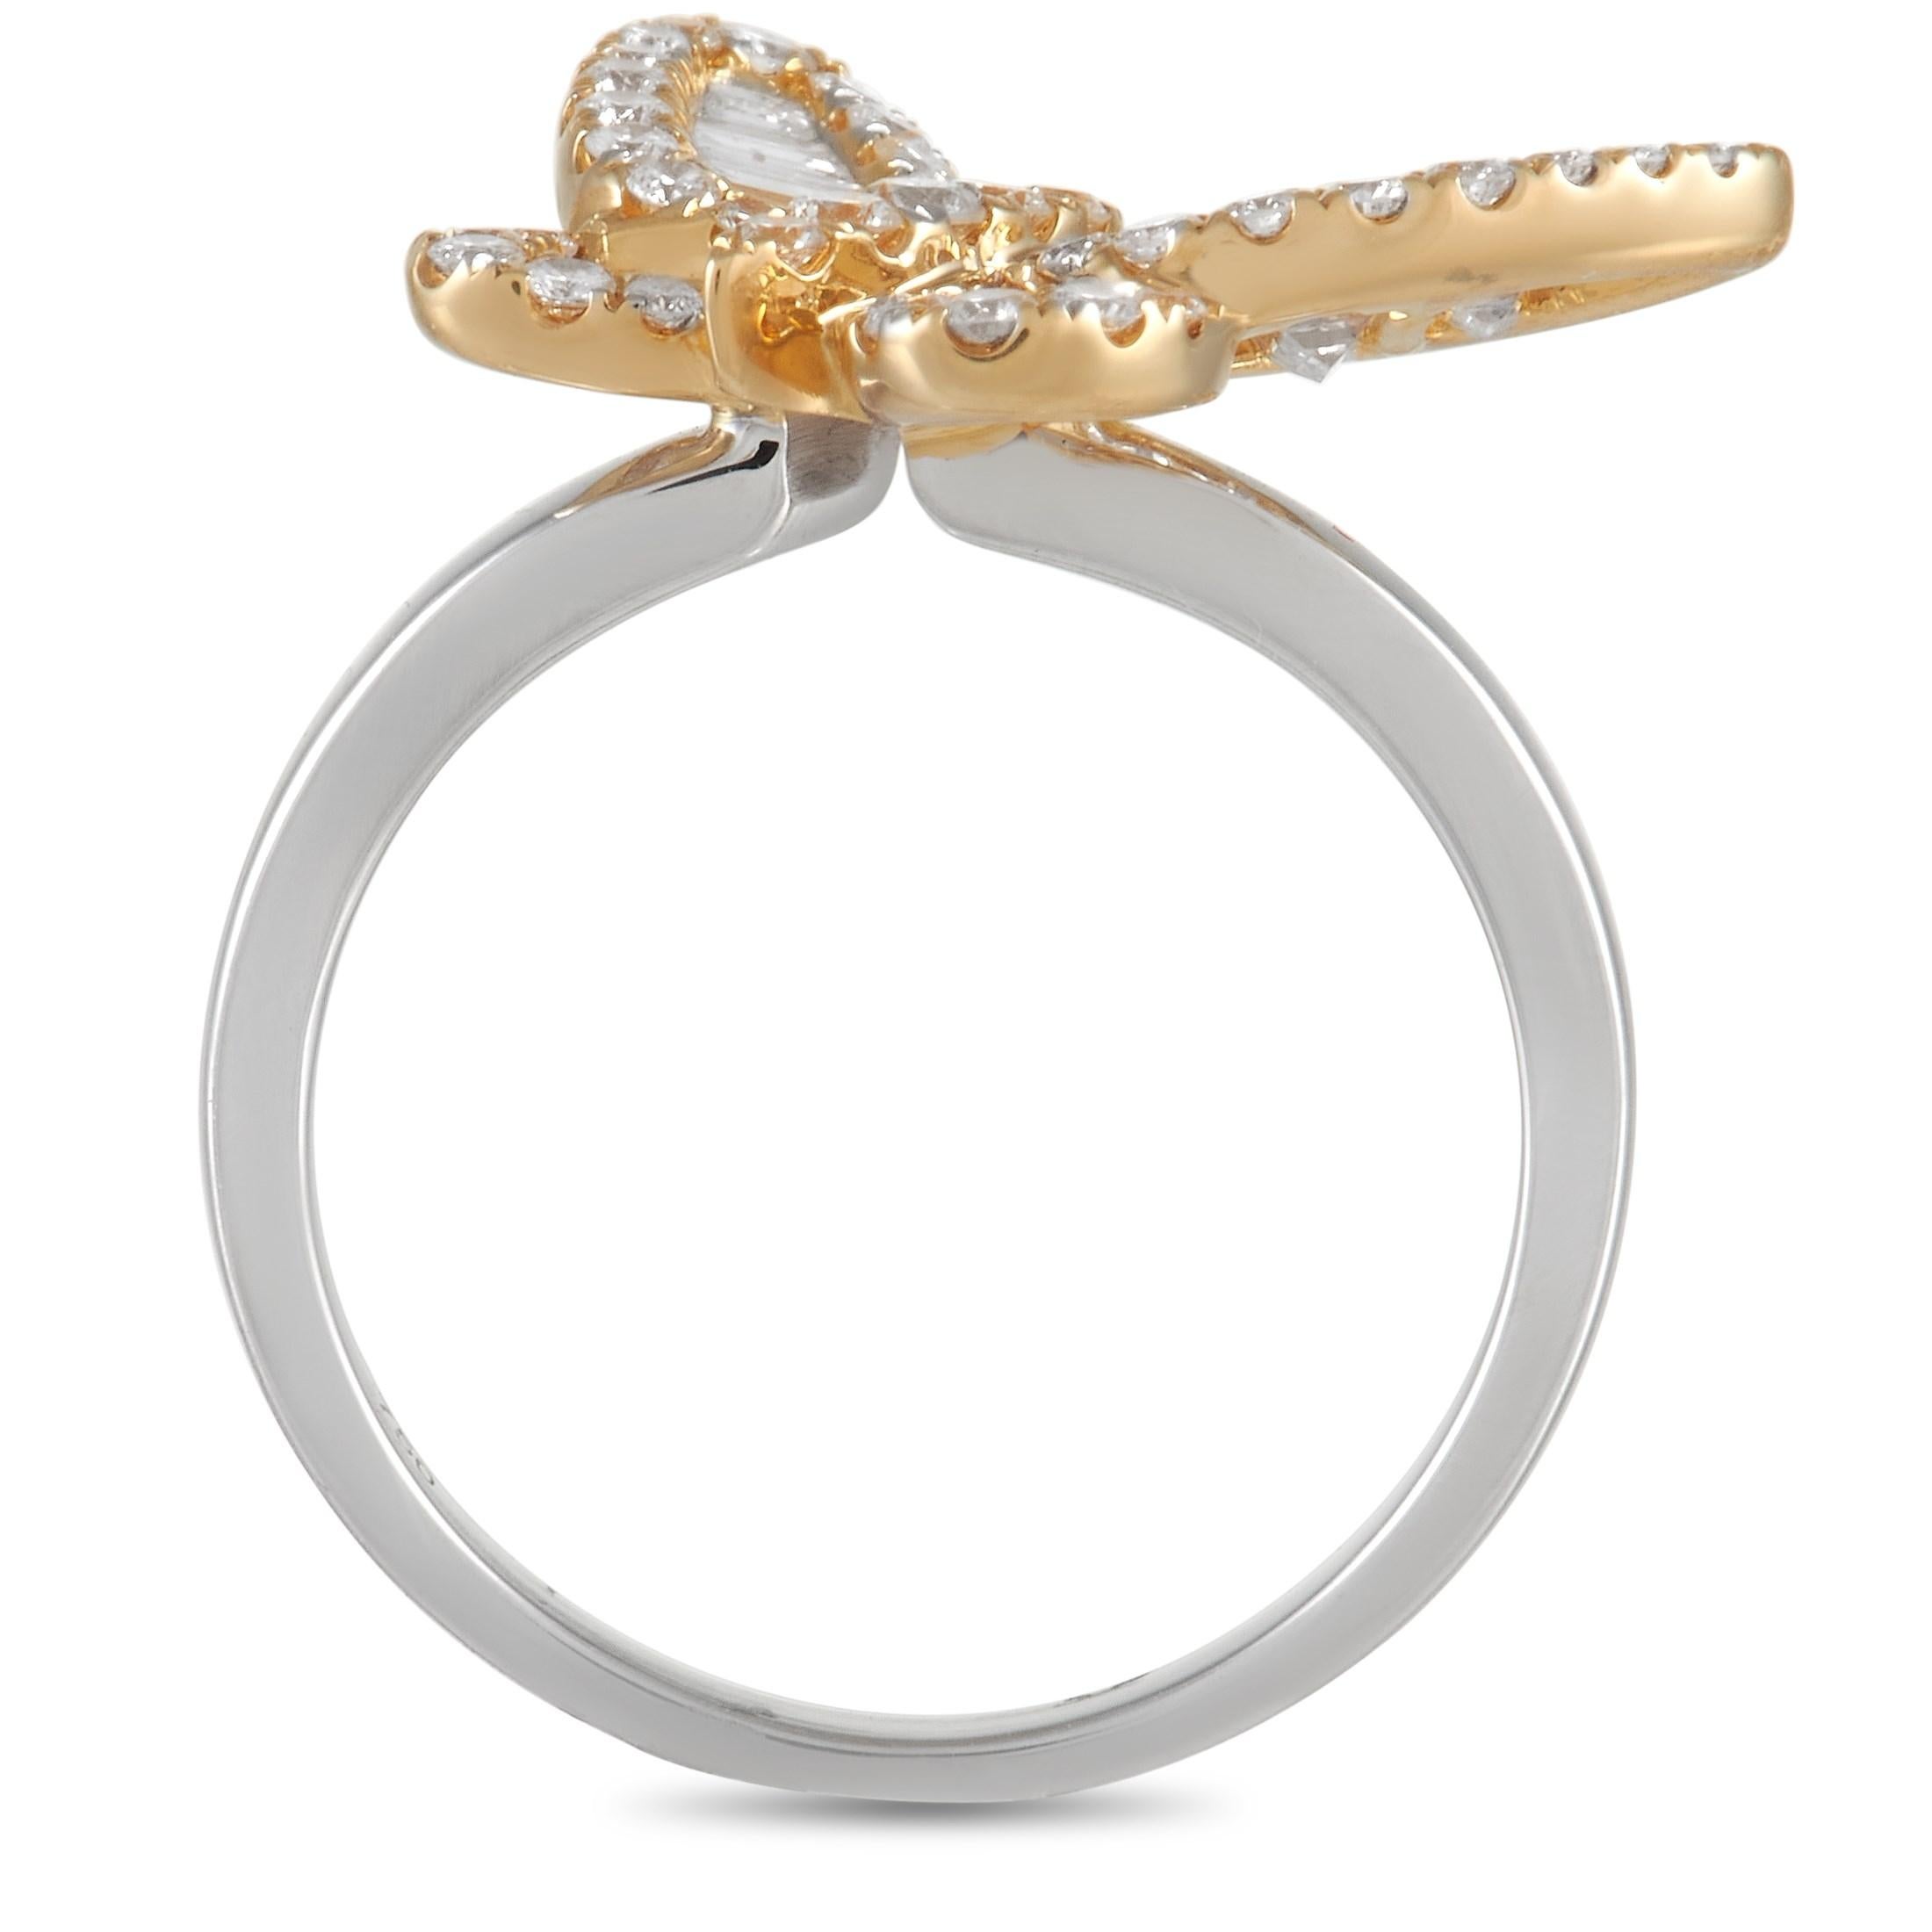 On this exquisite ring, a luminous 18K Yellow Gold butterfly motif is perched atop a sleek 2mm wide band made from 18K White Gold. It’s covered in 0.85 carats of diamond baguettes as well as additional diamond accents totaling 0.48 carats. A top